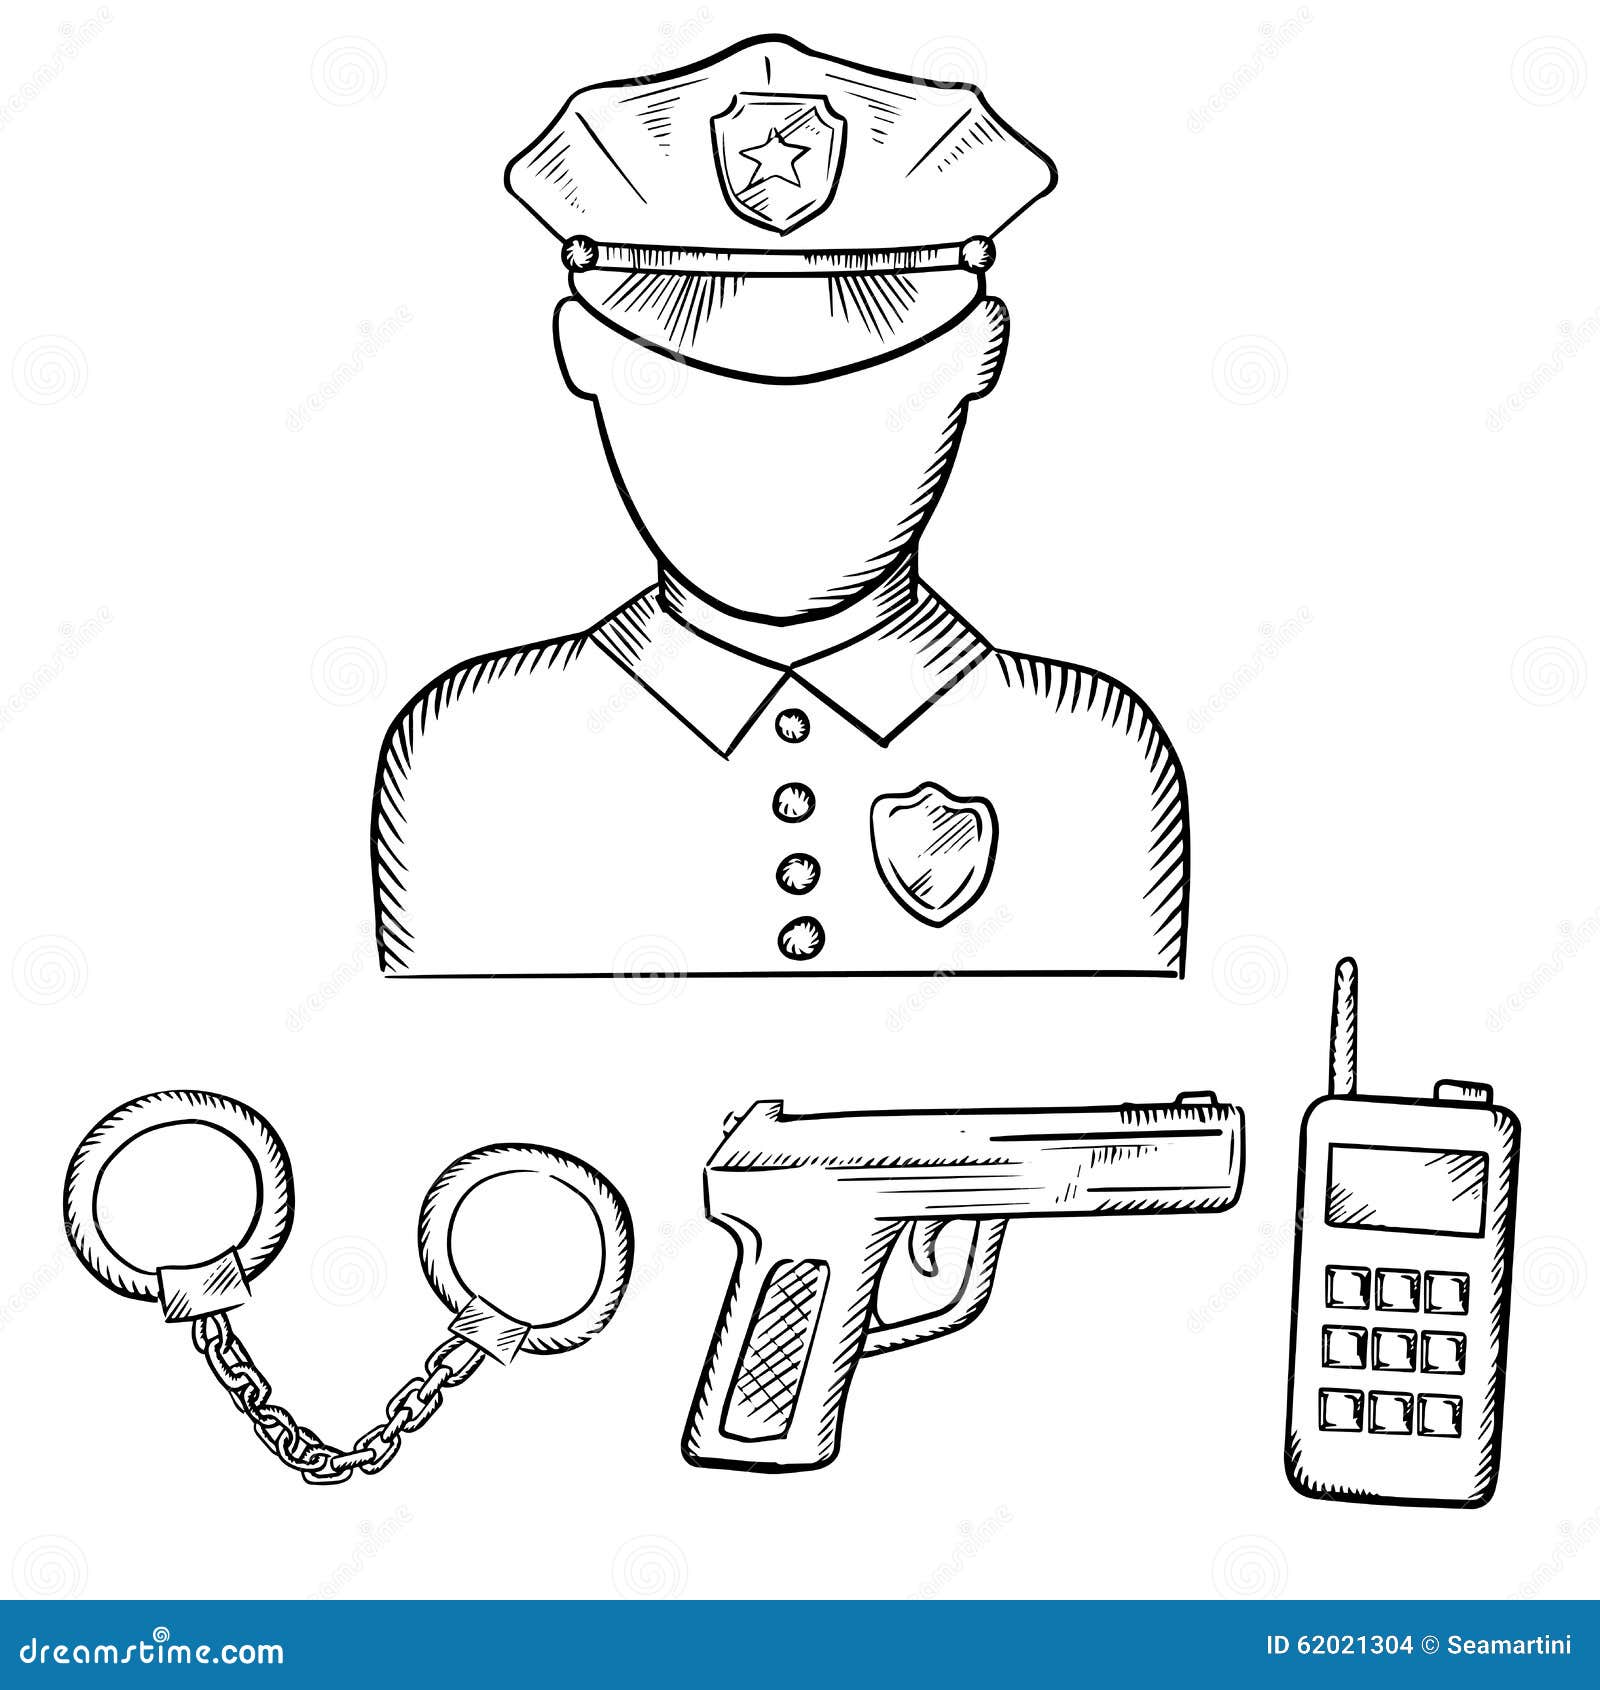 Policeman With Handcuffs And Gun Sketches Stock Vector